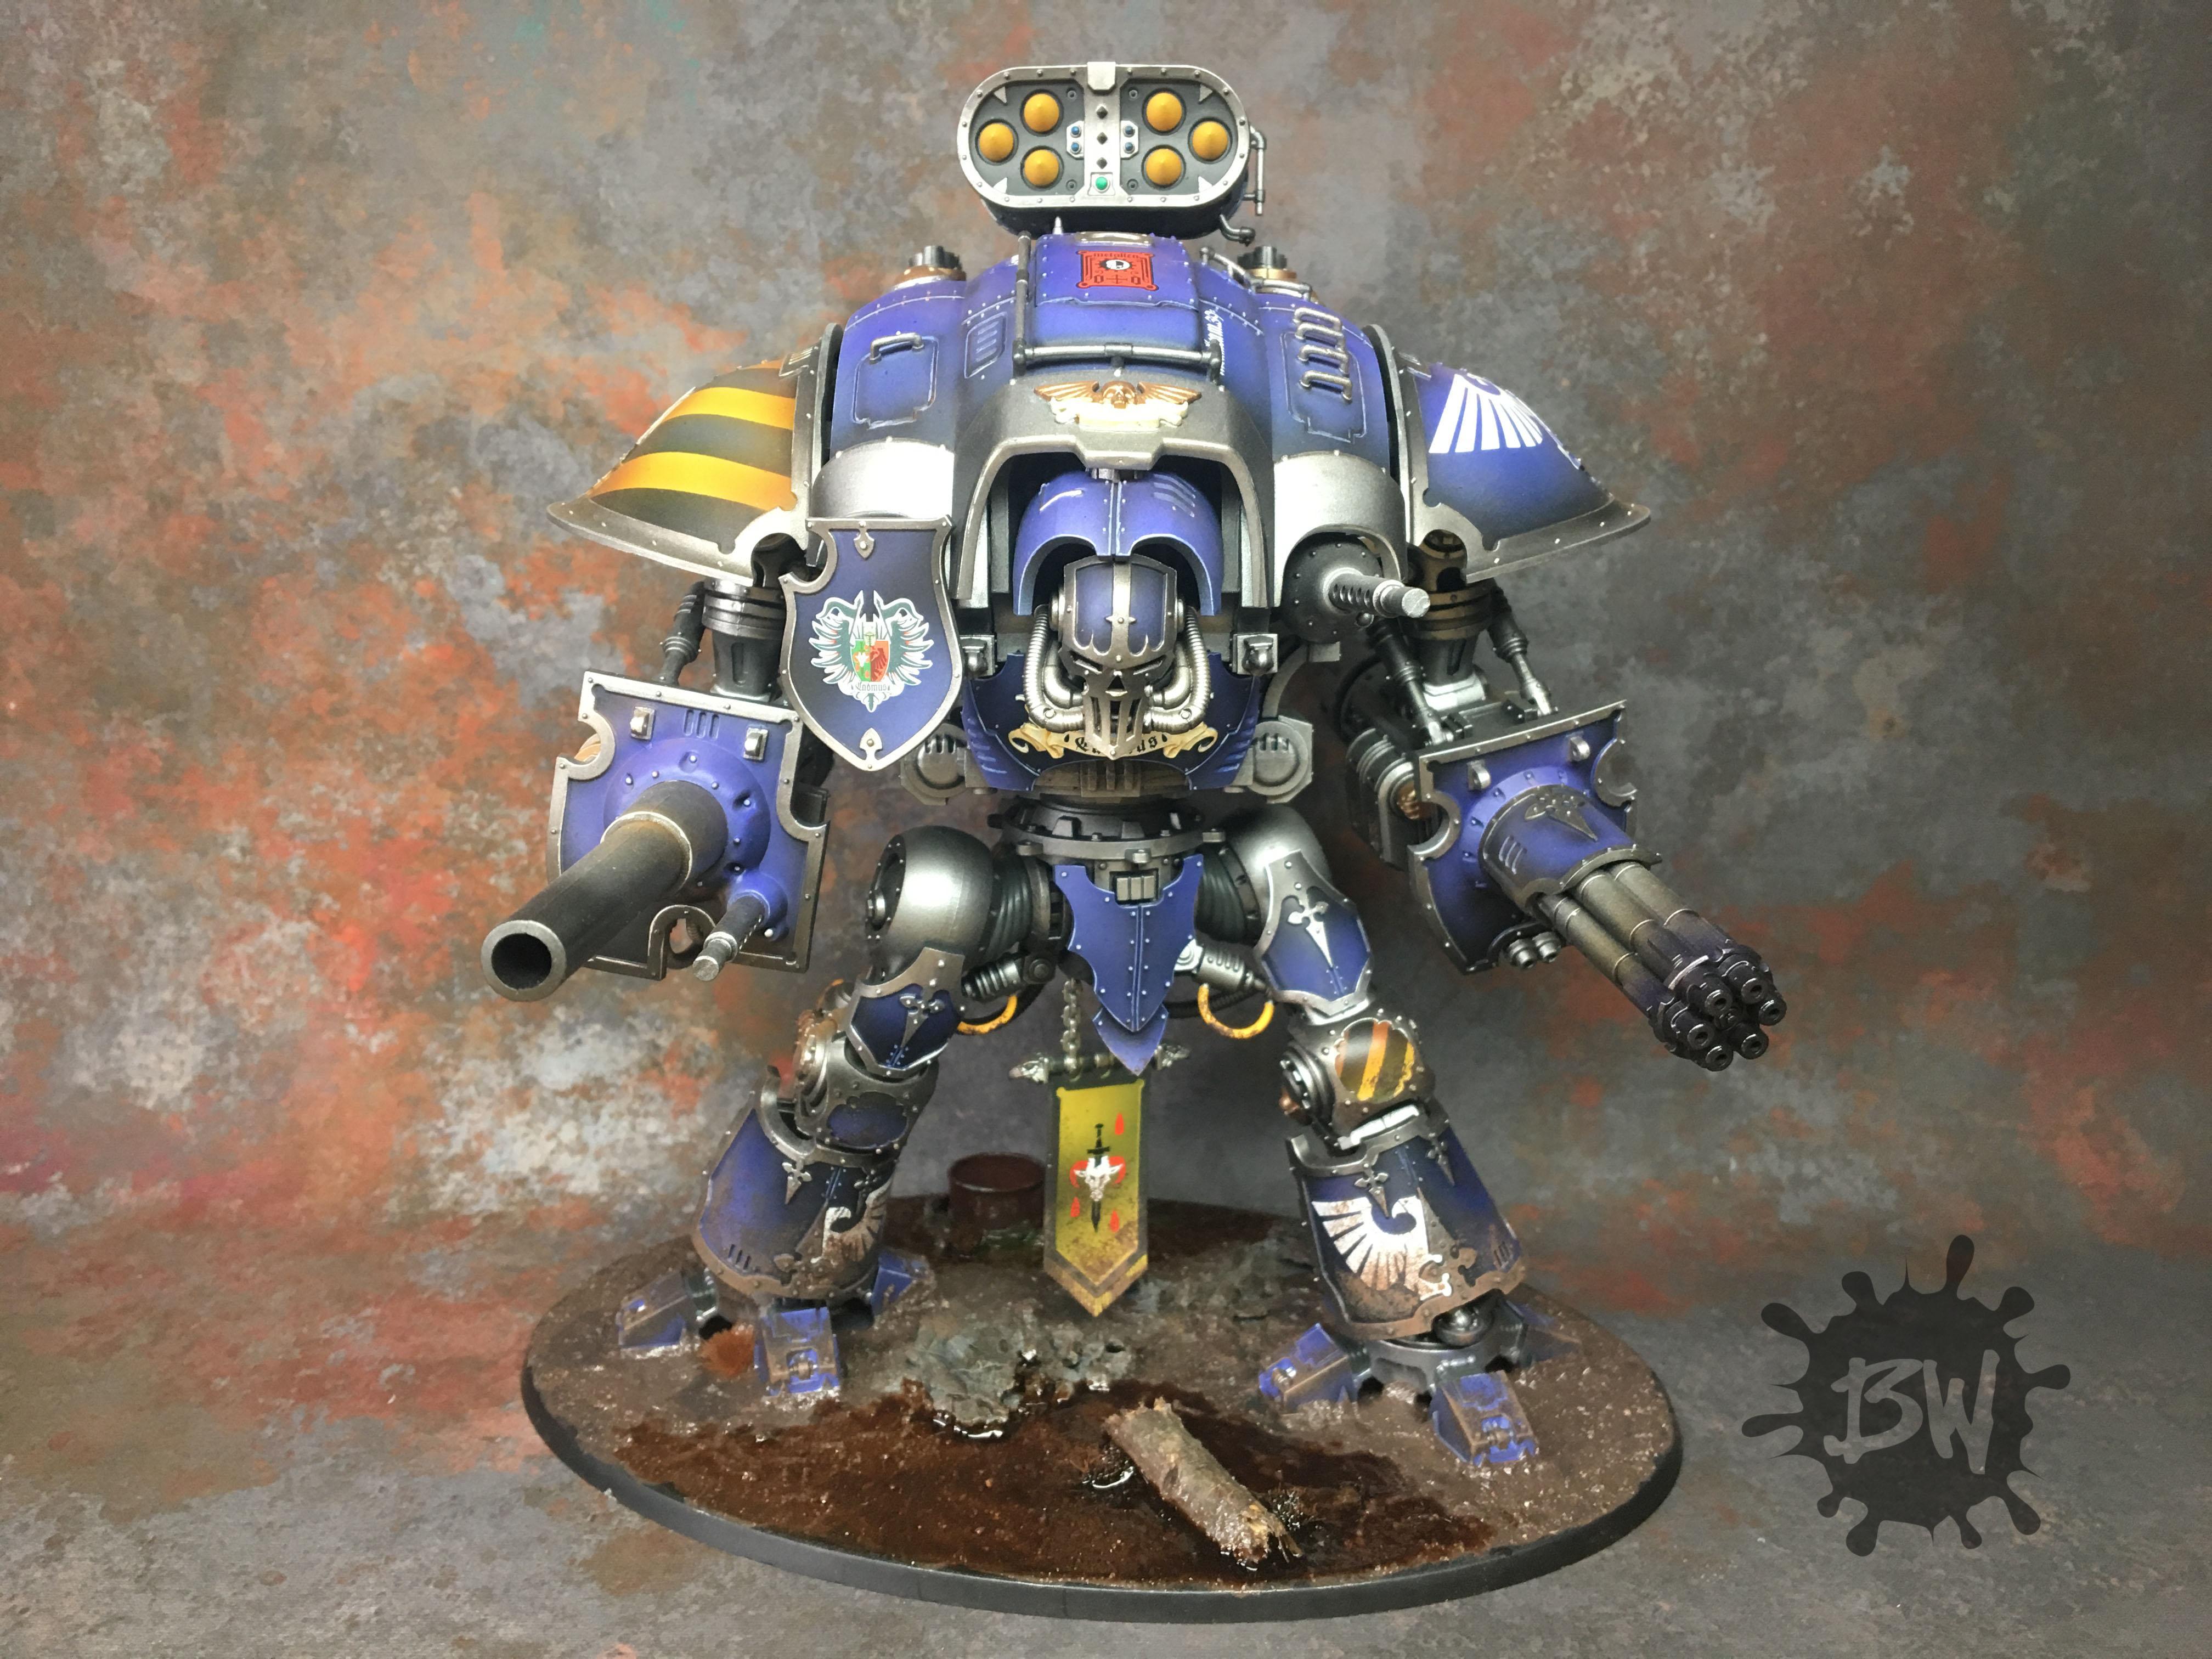 Bw, Commission, Imperial Knight Crusader, Imperium, Painting, Warhammer 40,000, Warhammer Fantasy